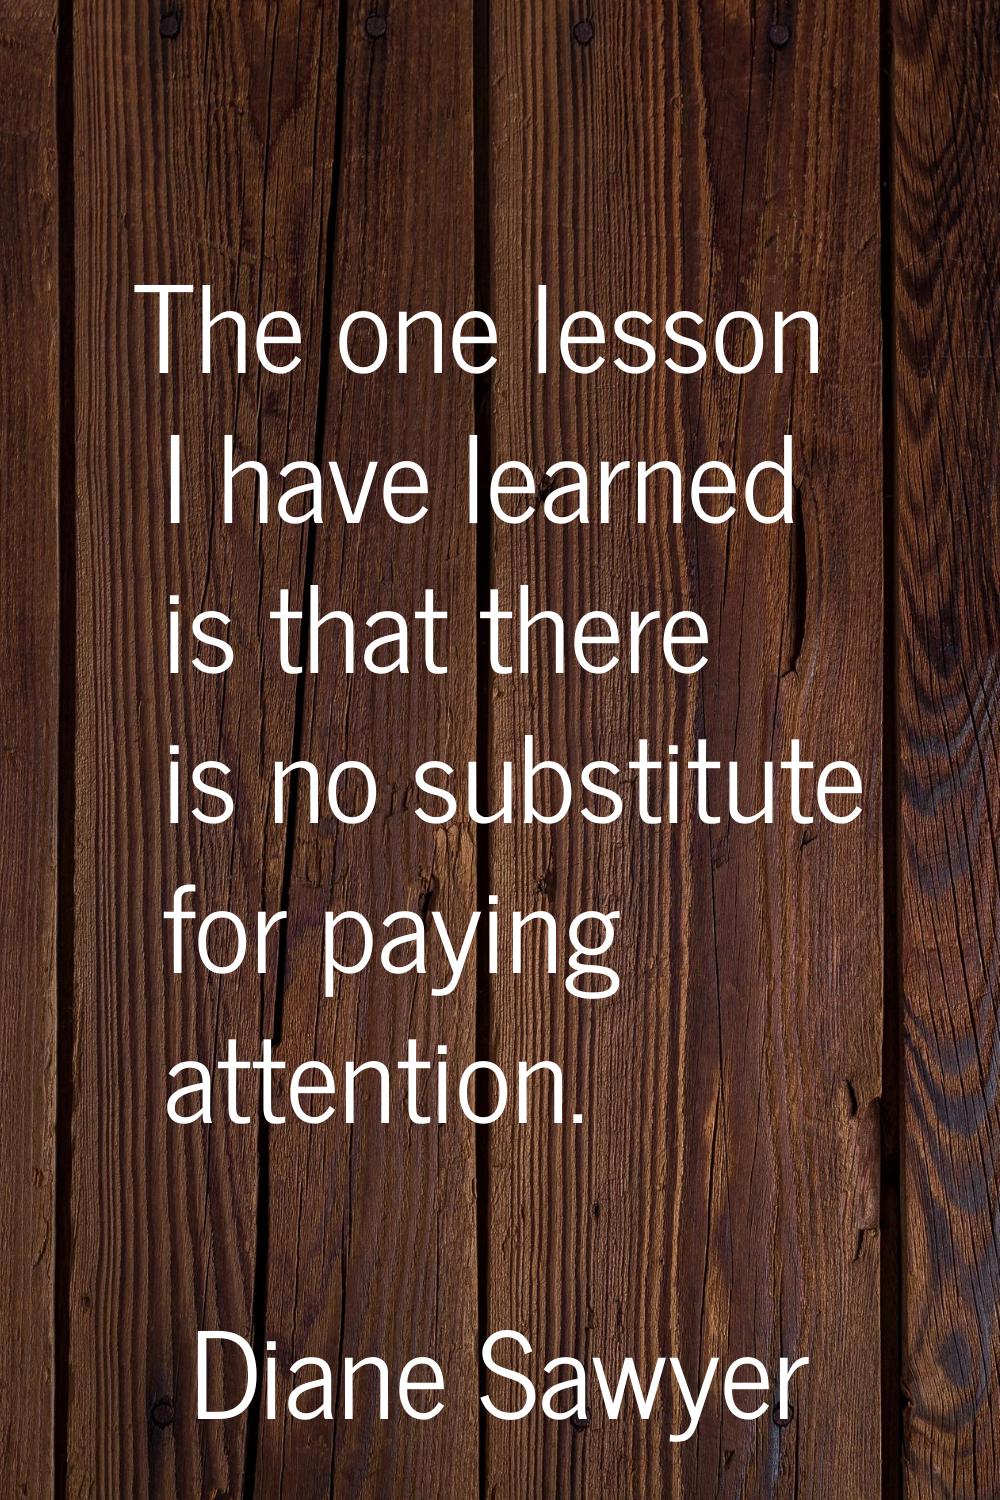 The one lesson I have learned is that there is no substitute for paying attention.